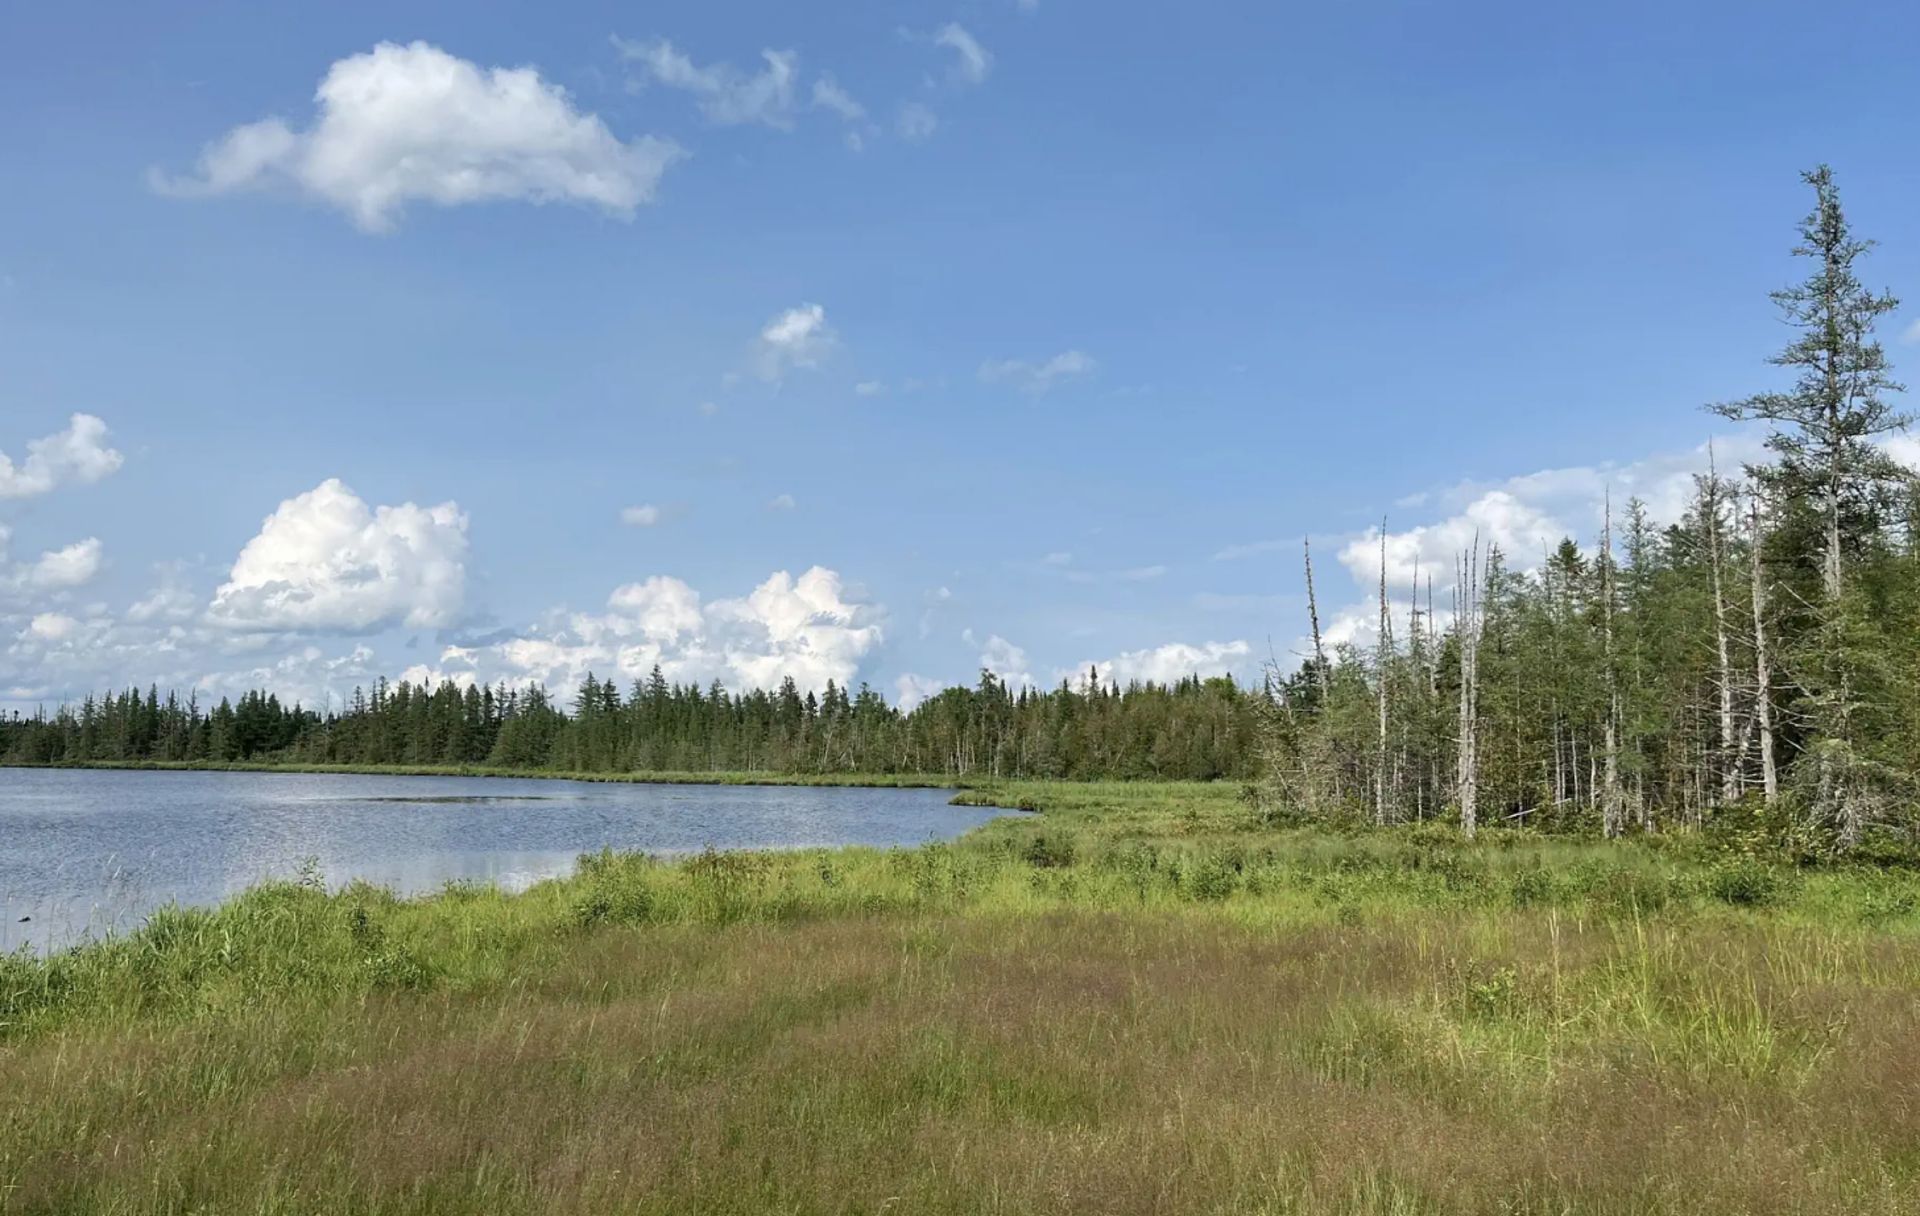 Create Your Ideal Retreat on 18+ Wooded Acres in Aroostook County, Maine! - Image 8 of 11